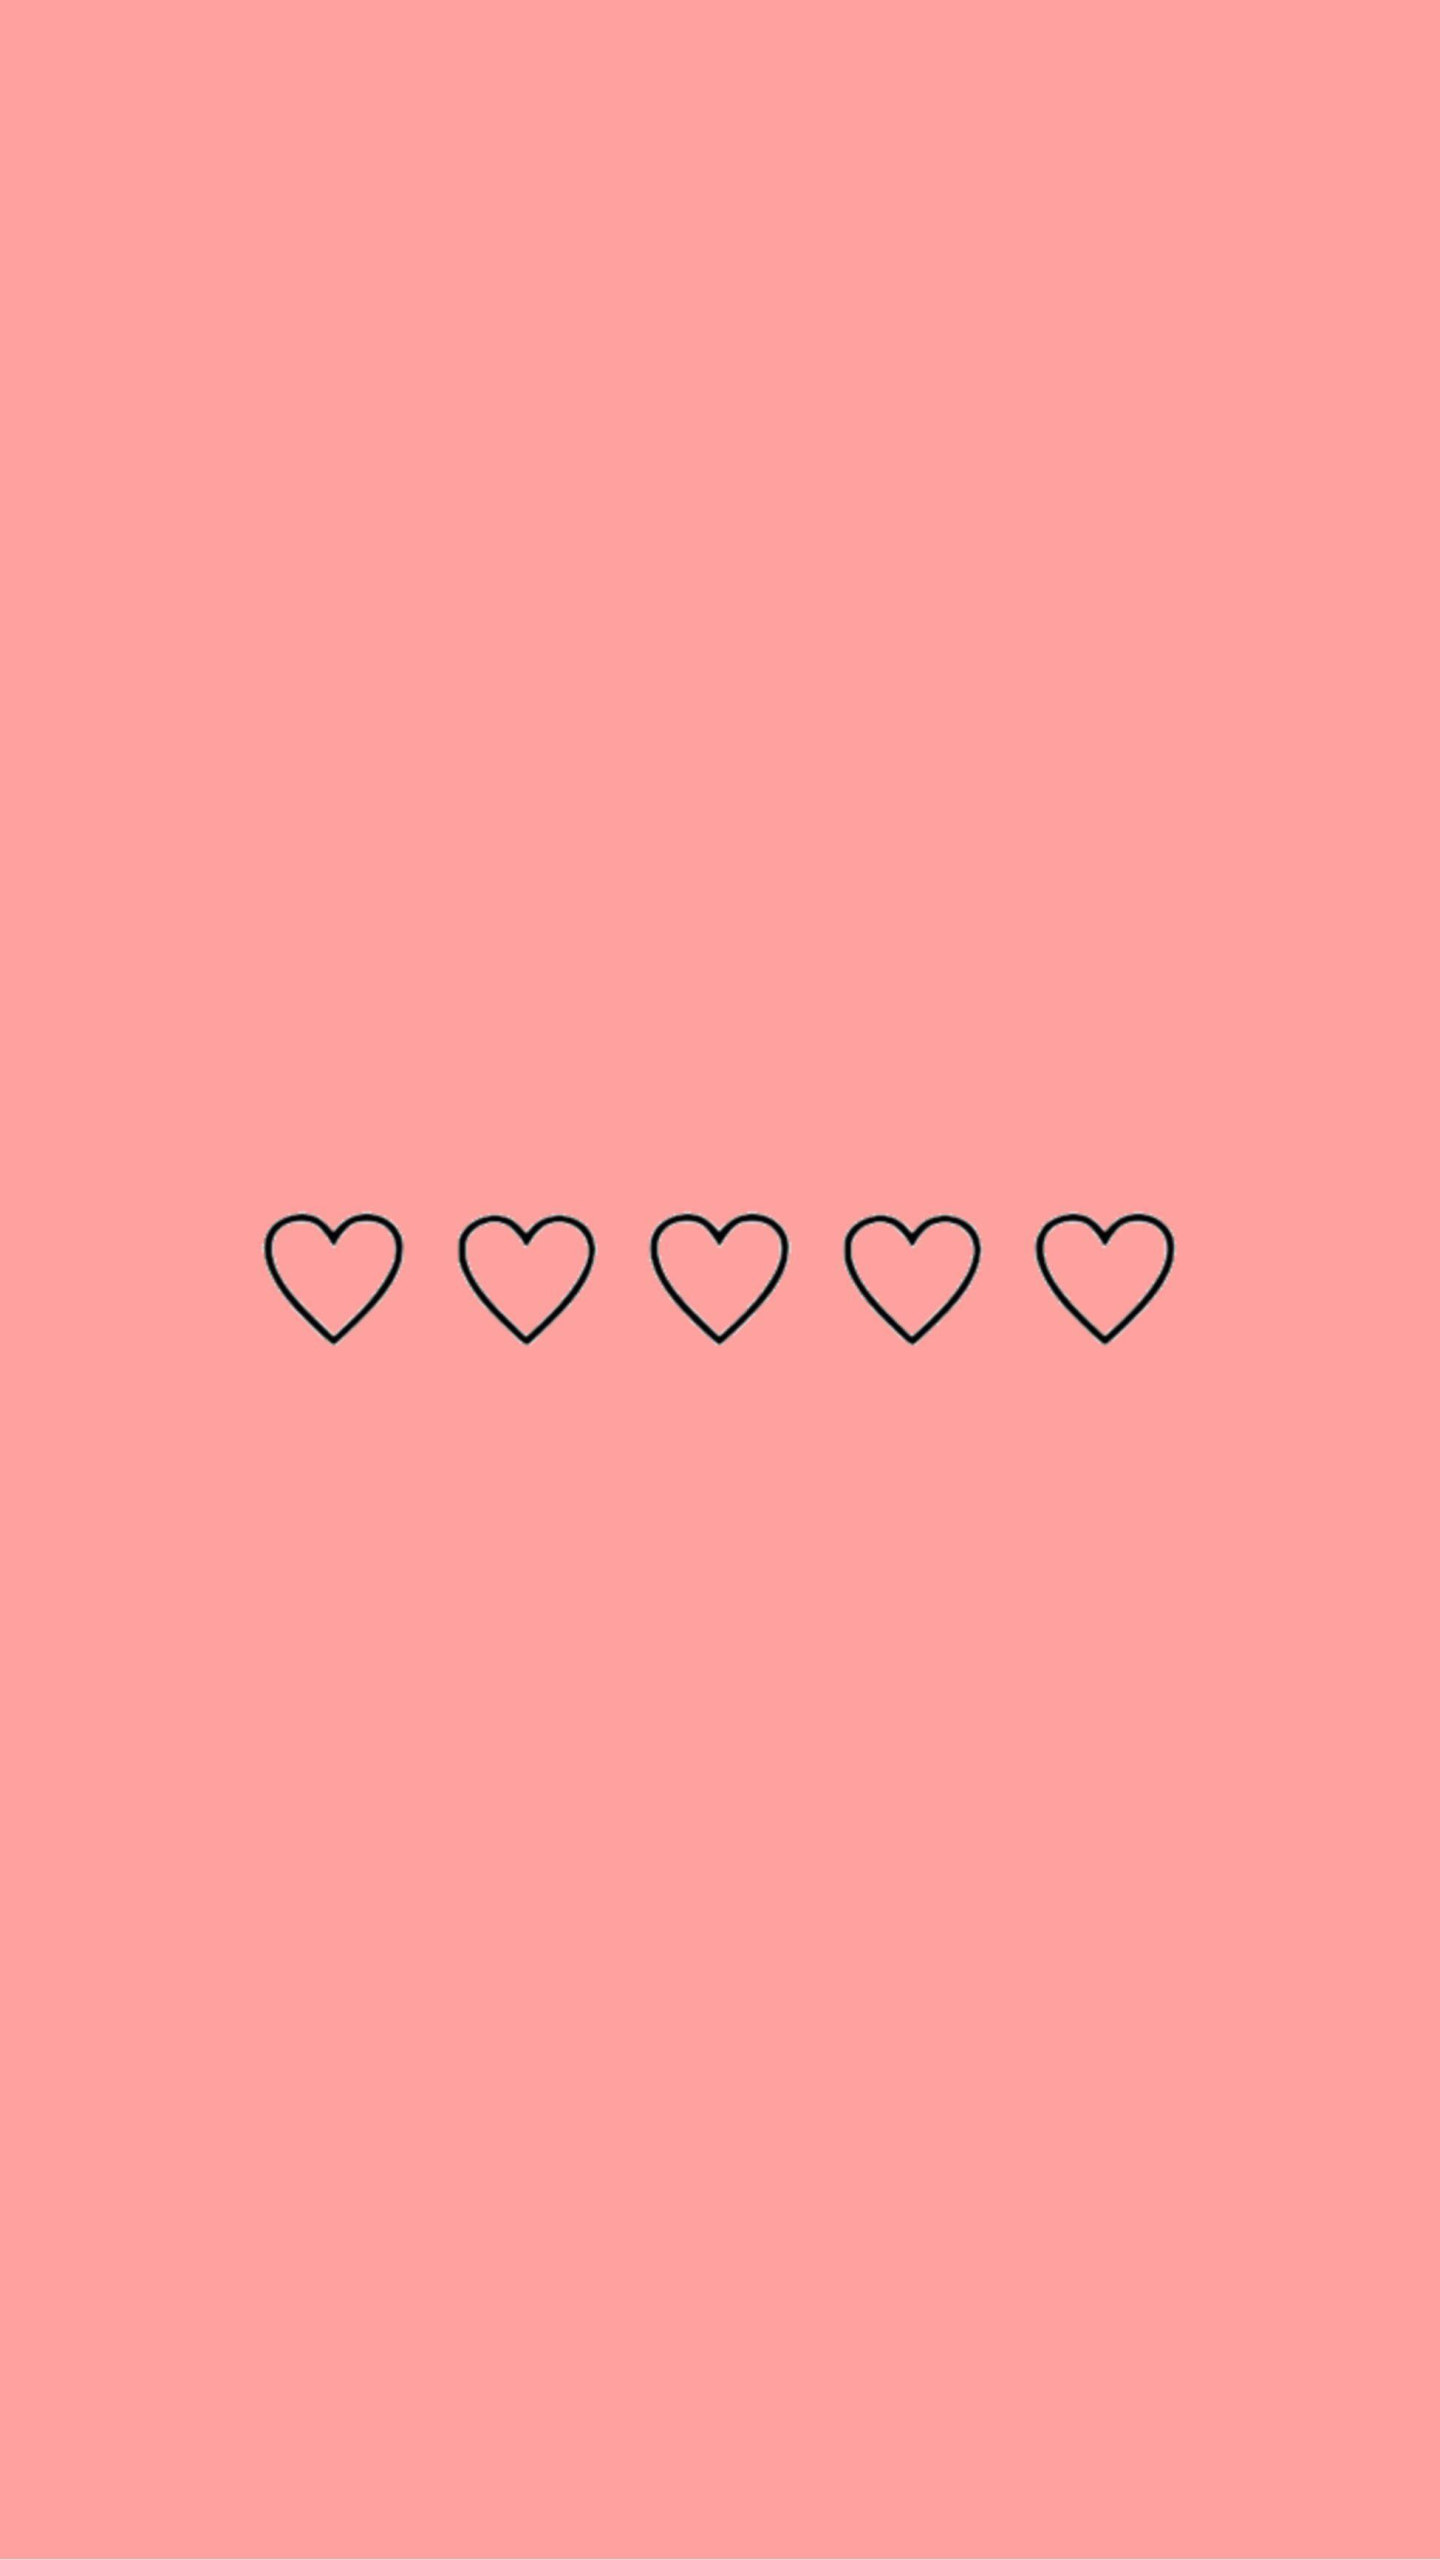 Wallpaper, pink, and hearts image - Cute